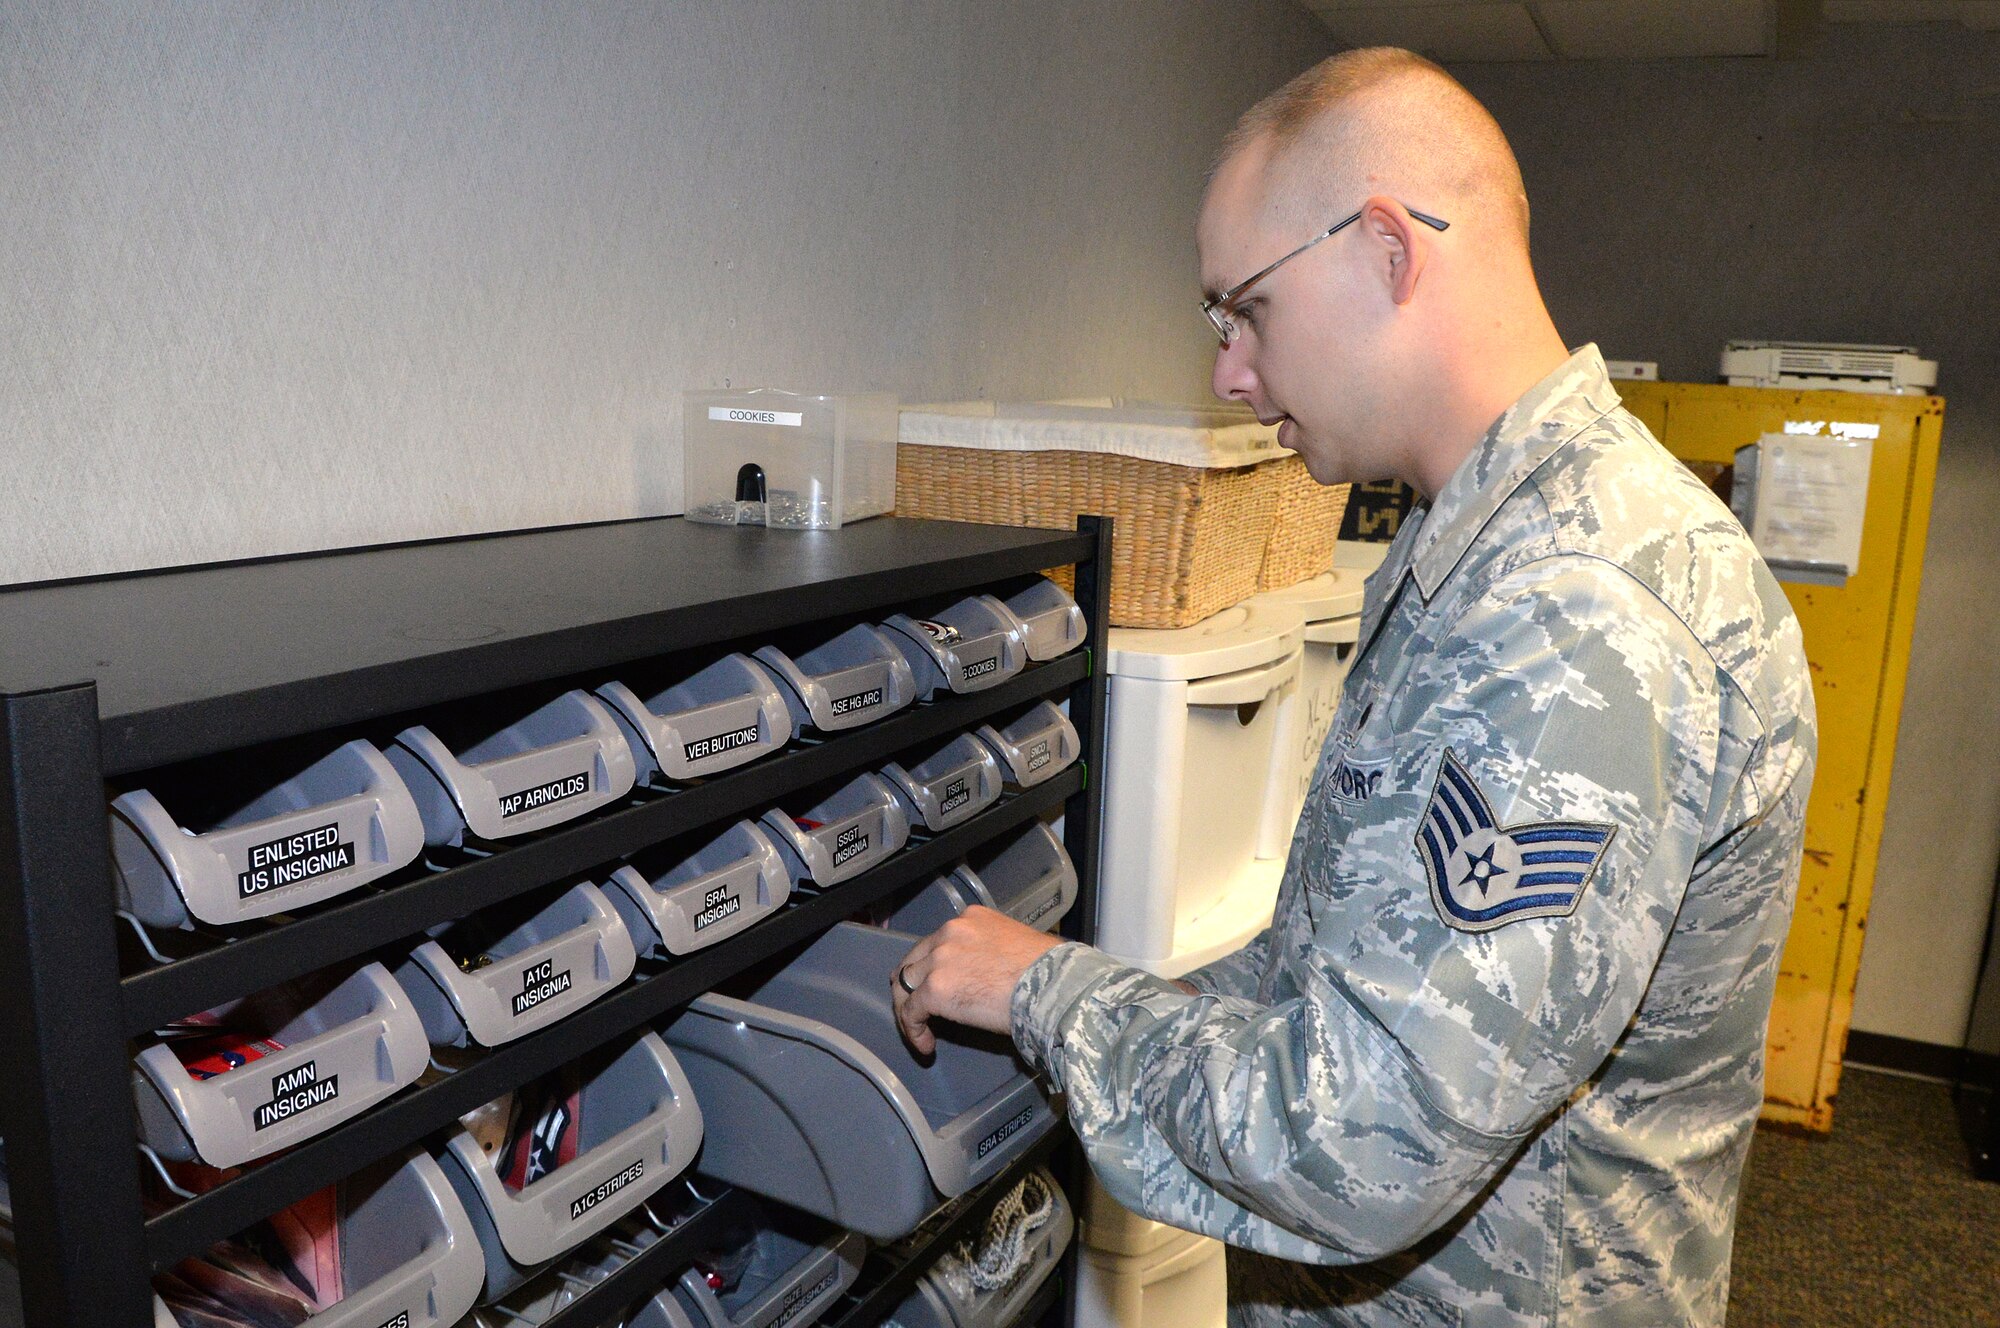 U.S. Air Force Staff Sgt. Christopher Burke’s, 55th Wing Honor Guard NCO in charge, organizes drawers full of uniform items such as rank insignia and stripes Aug. 7 at Offutt Air Force Base, Nebraska. Burke has collected more than 300 various items needed to equip and outfit the honor guard members. (U.S. Air Force photo by Dana P. Heard)